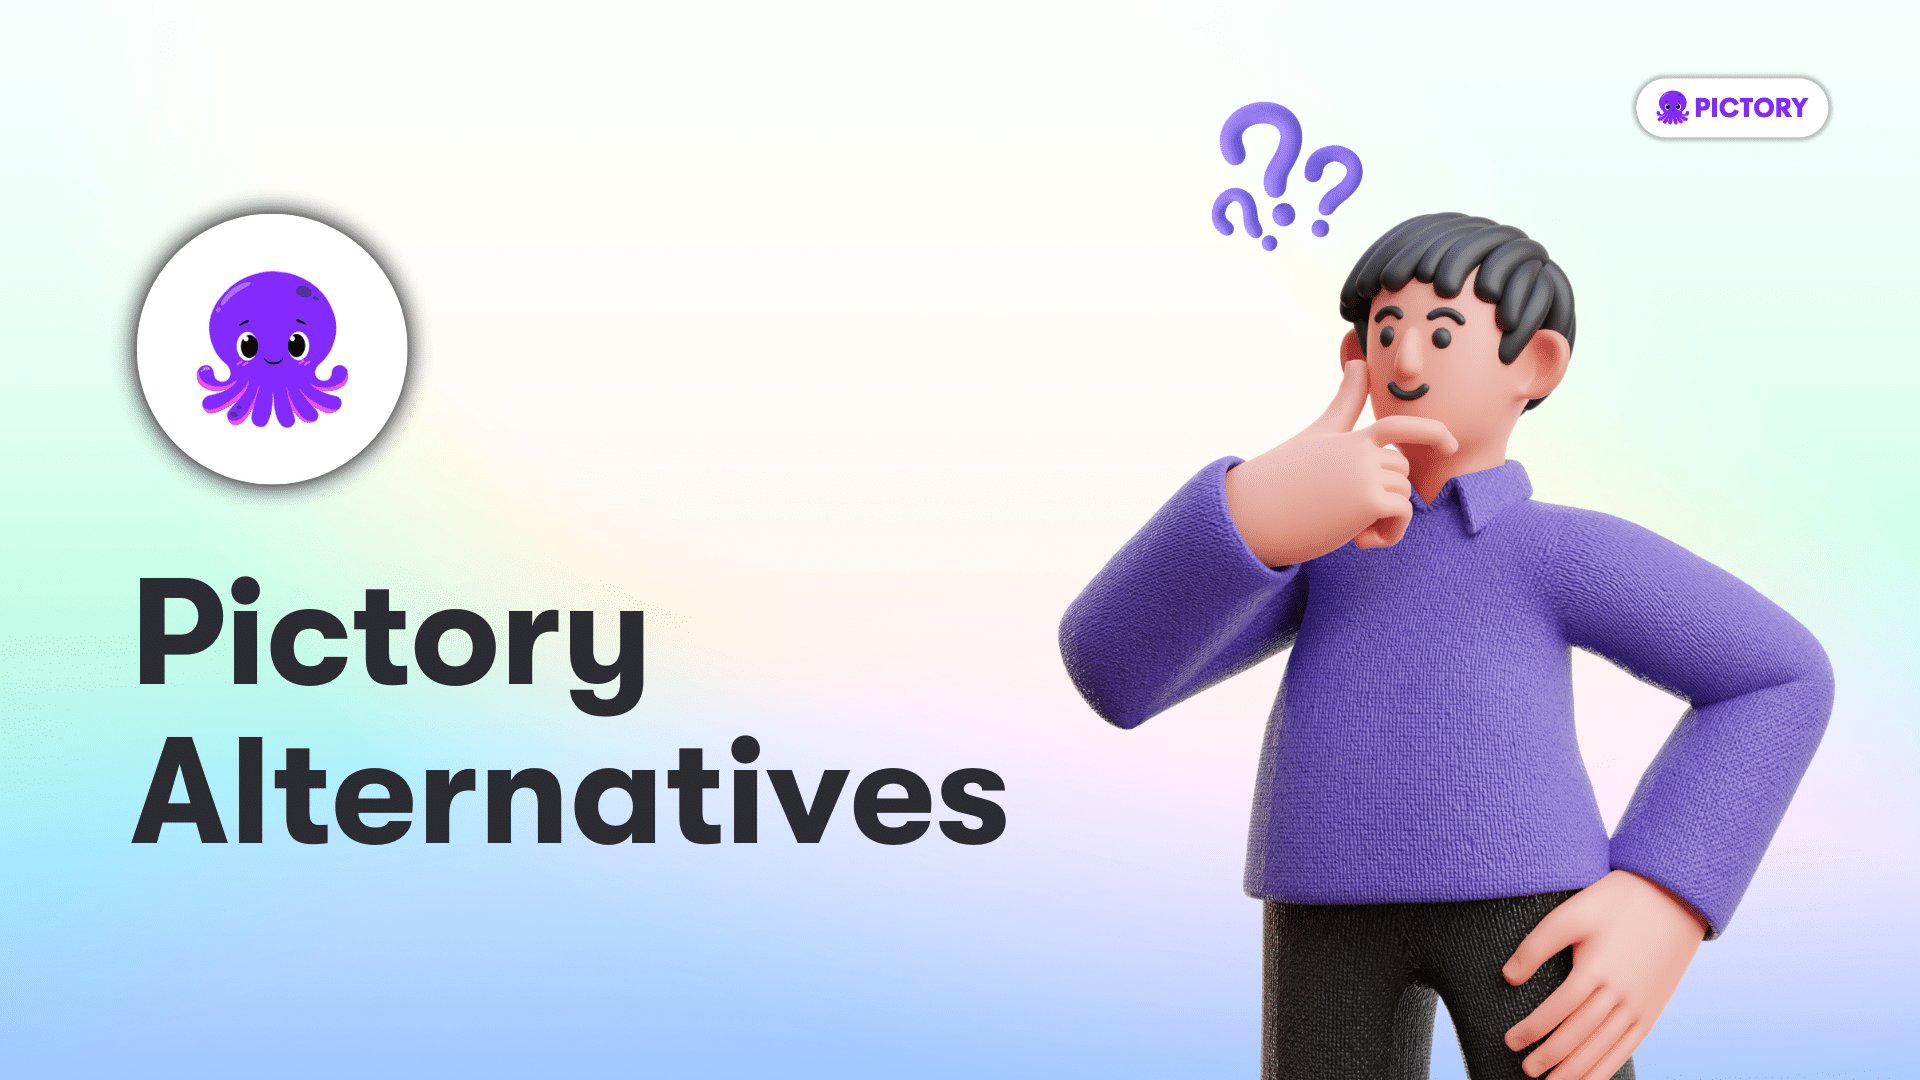 Pictory logo with the 'Pictory alternatives' text and a cartoon man looking quizzical